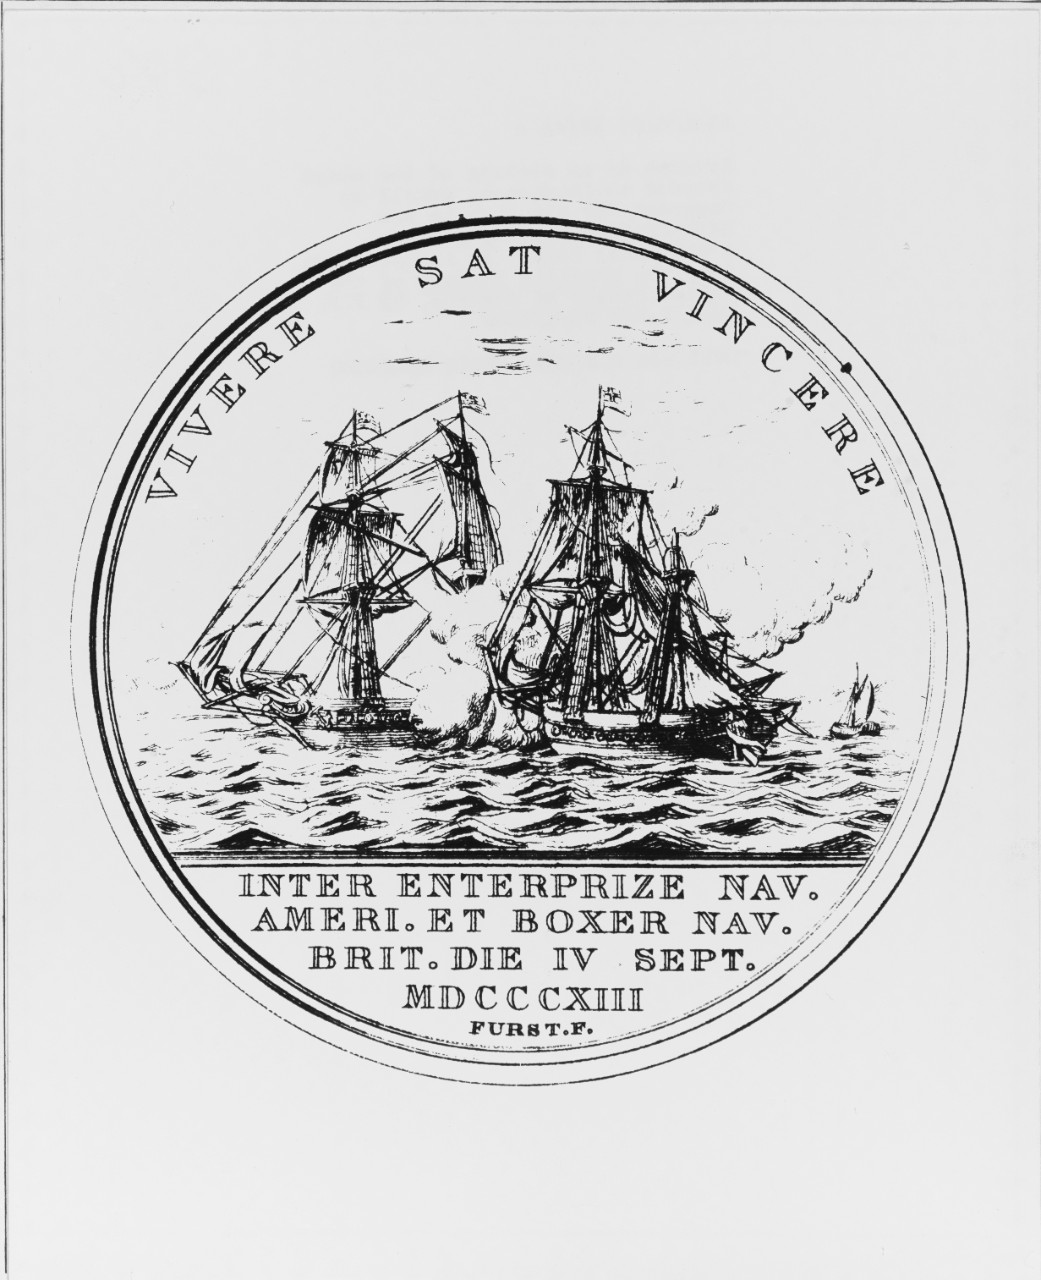 Reverse of an etching of the medal awarded to Lieutenant MC